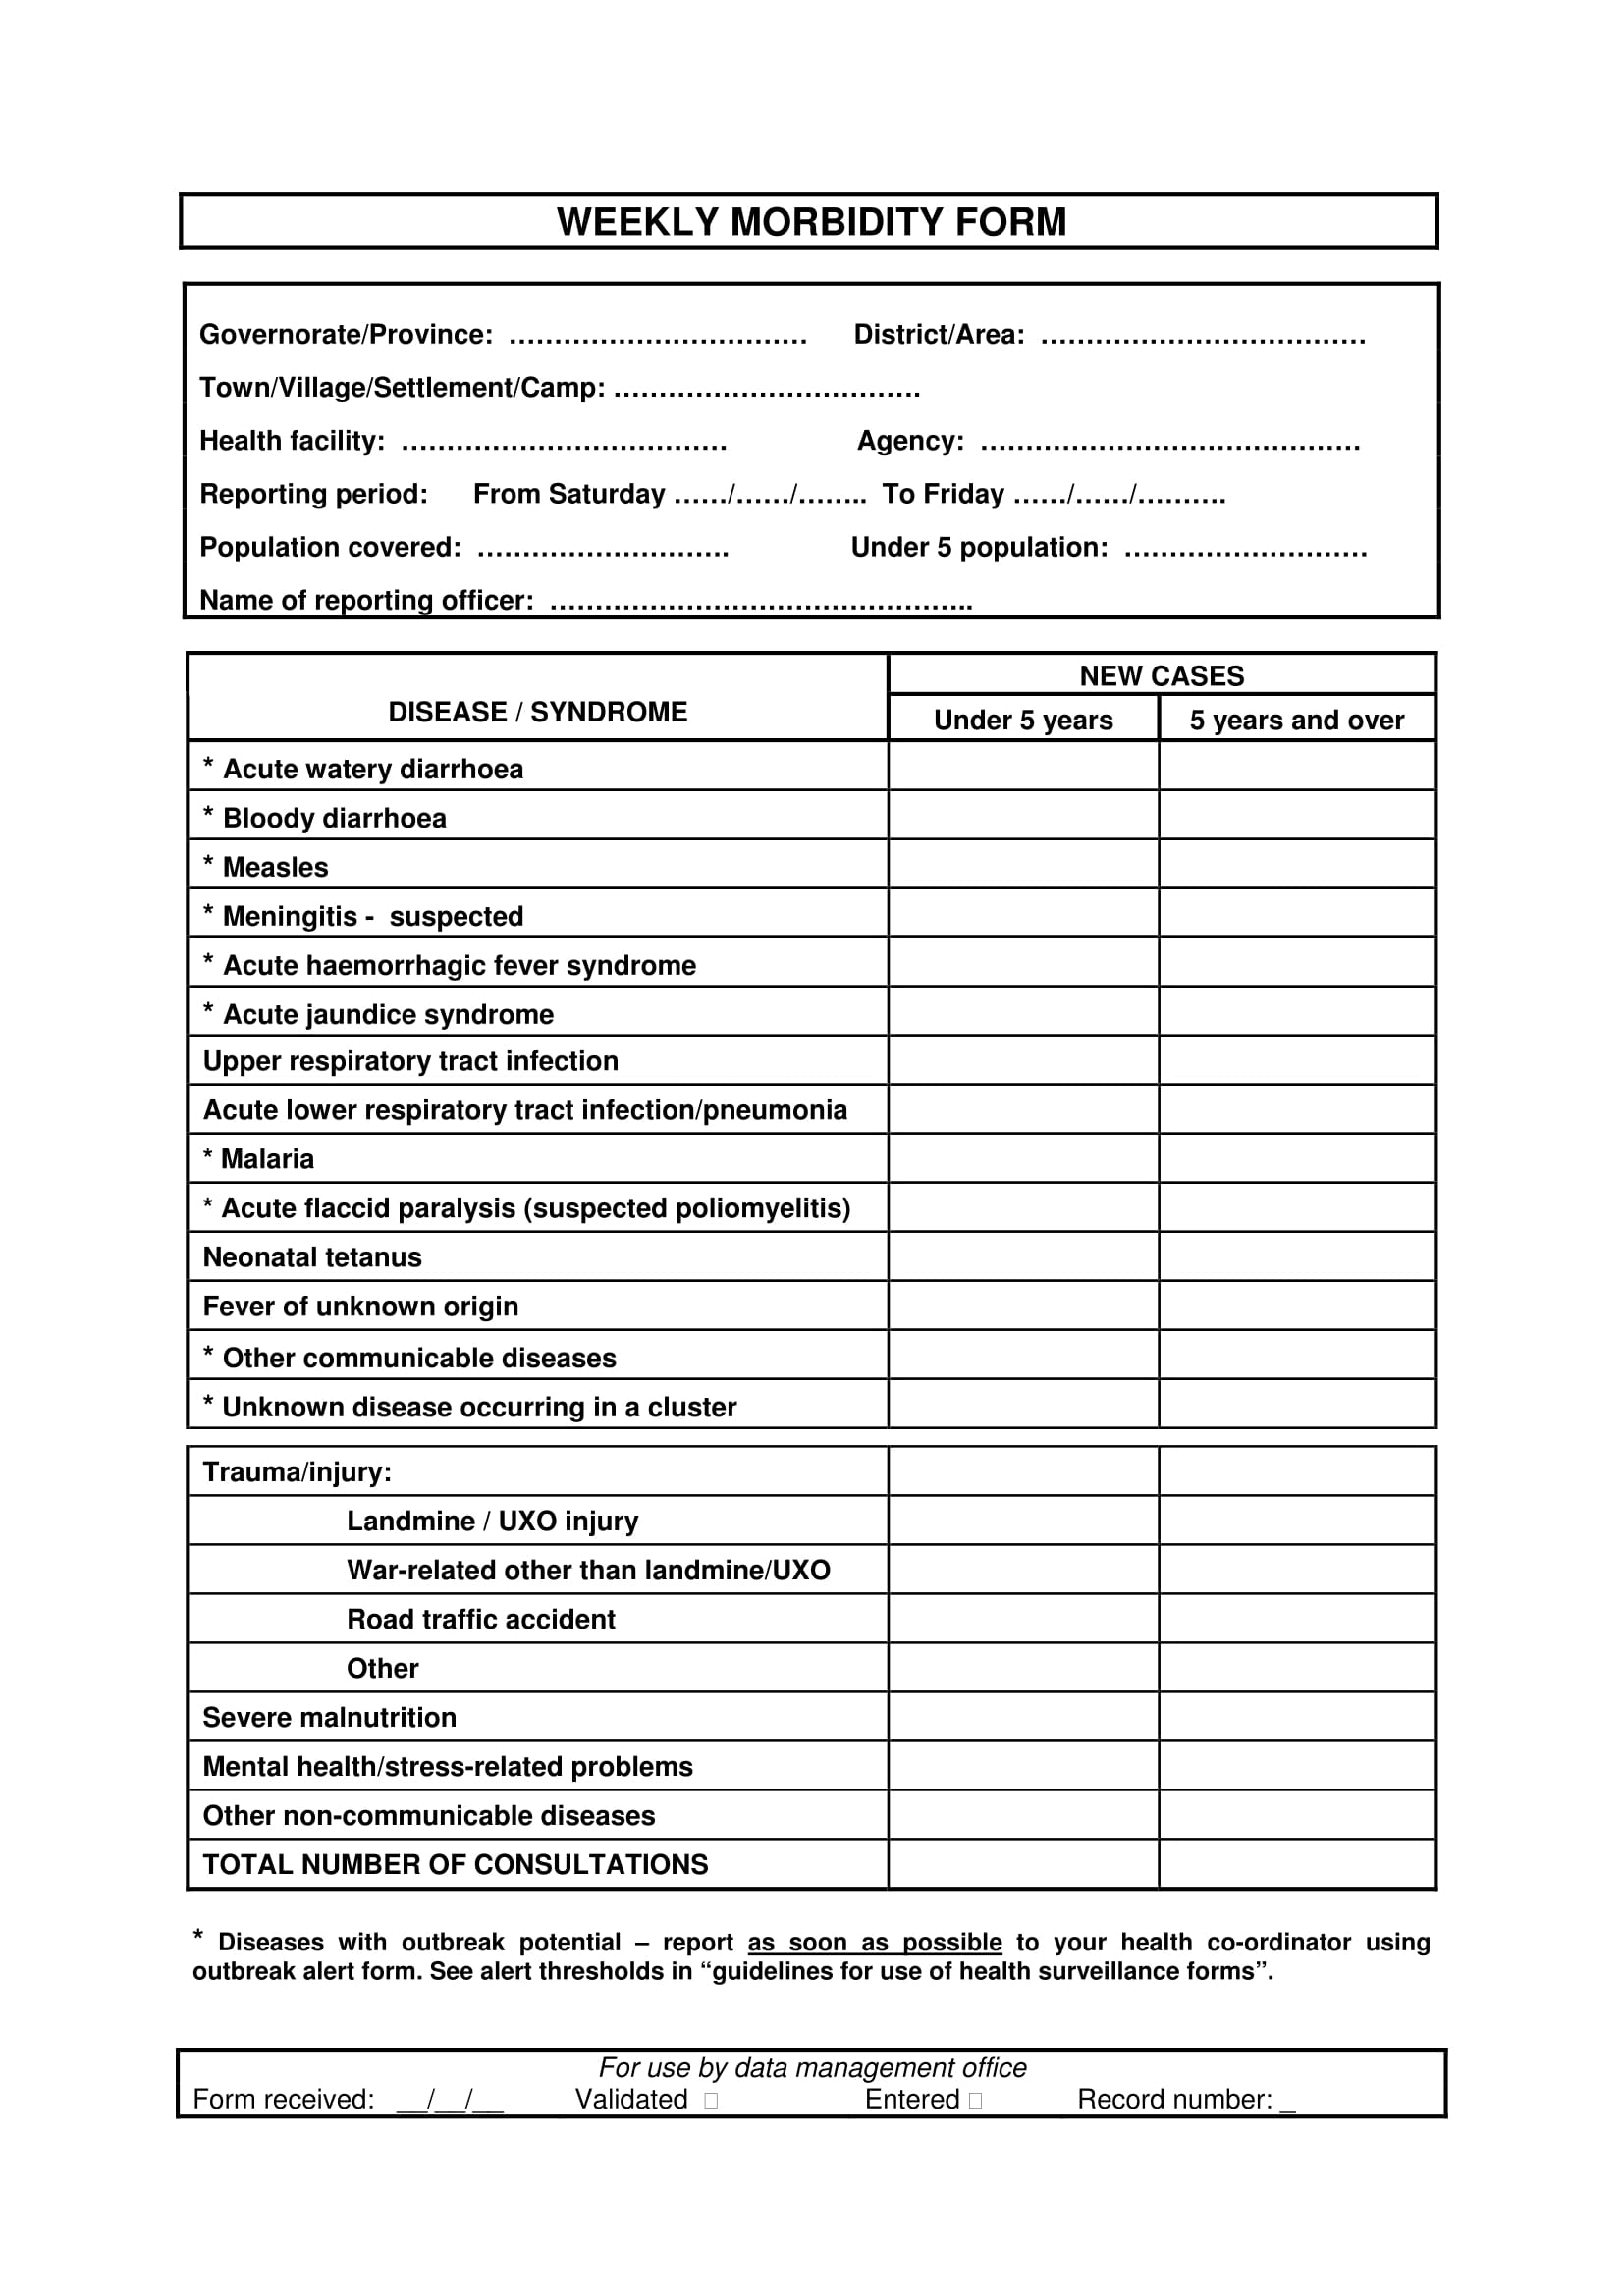 weekly morbidity report form 1